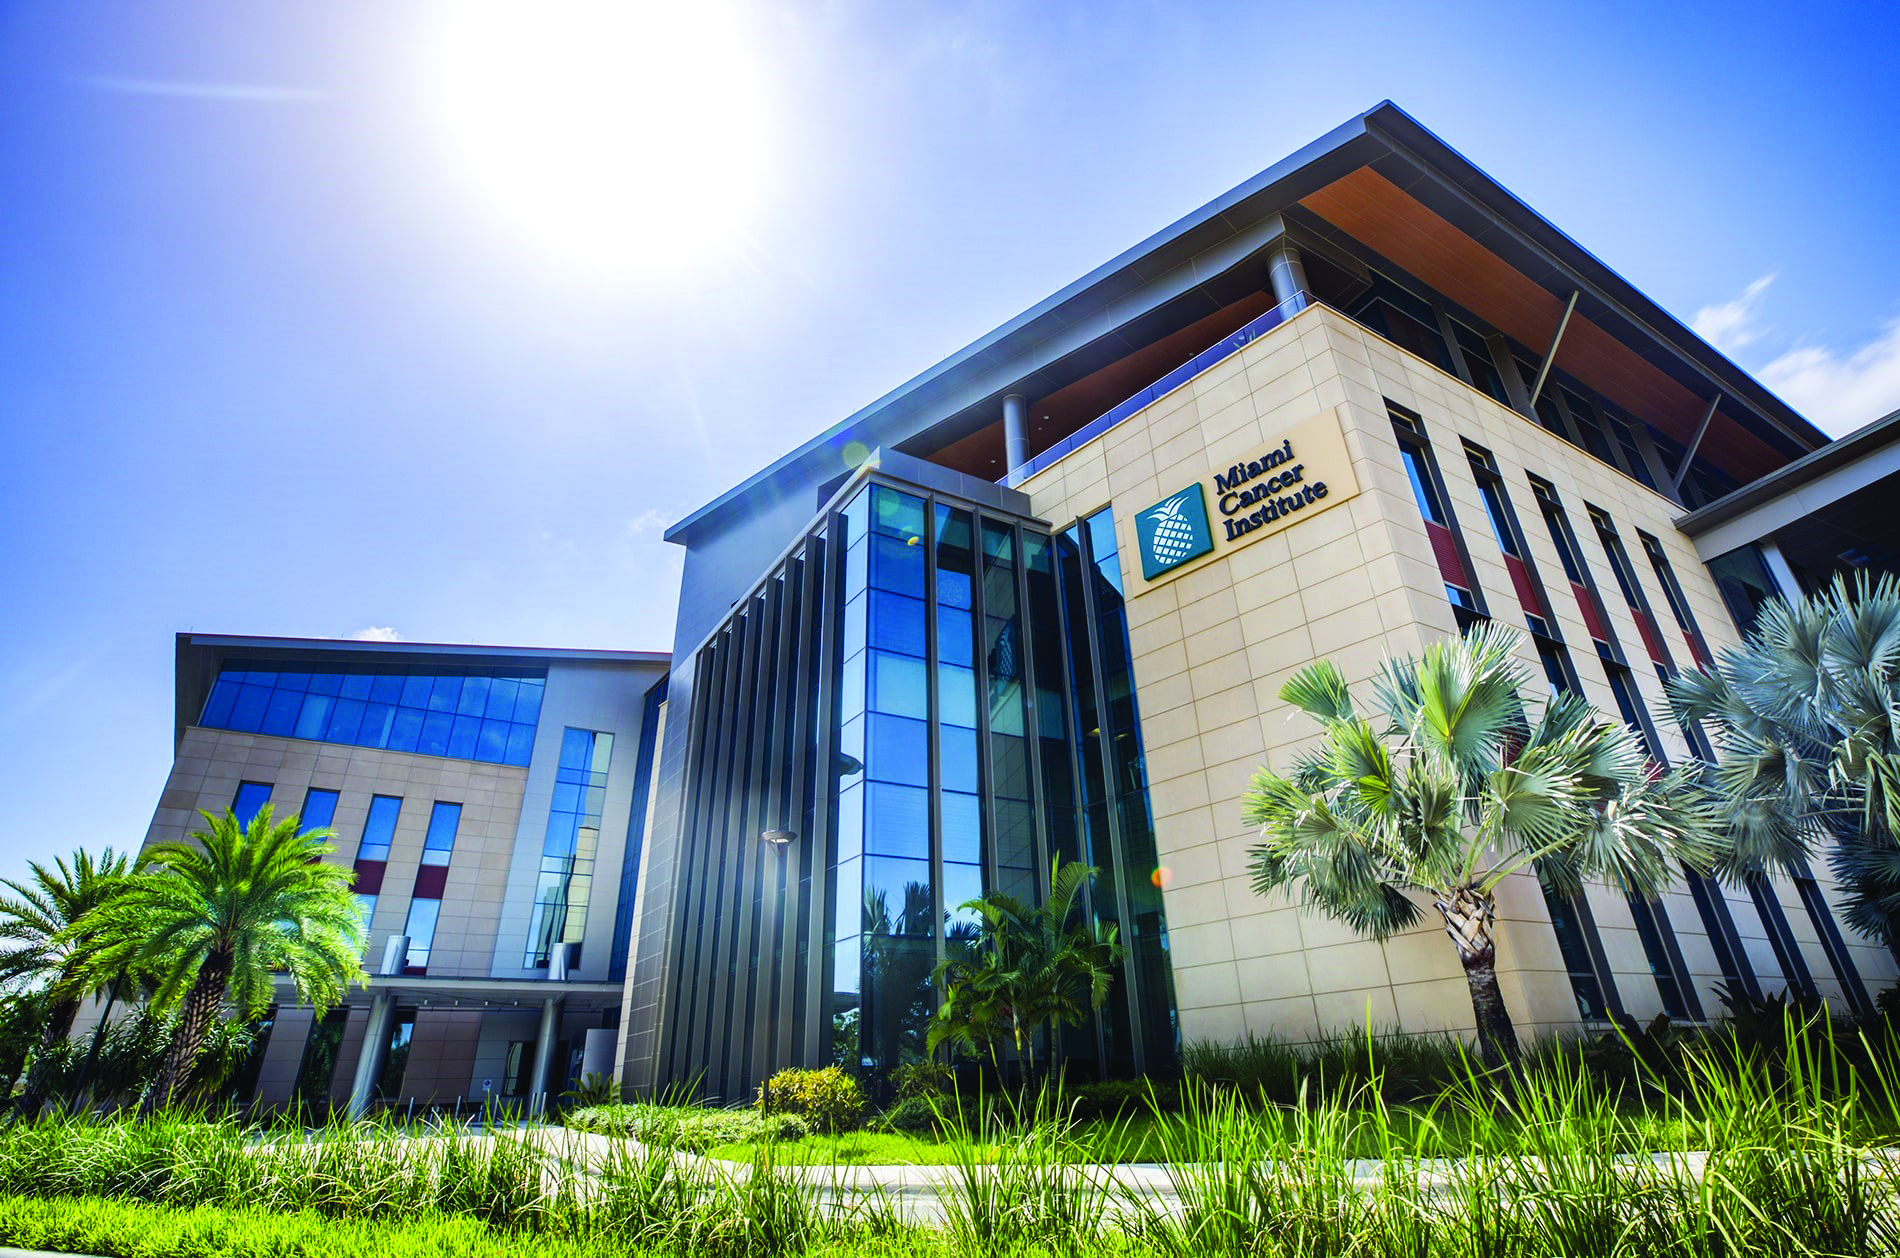 The Miami Cancer Institute at Baptist Health South Florida.